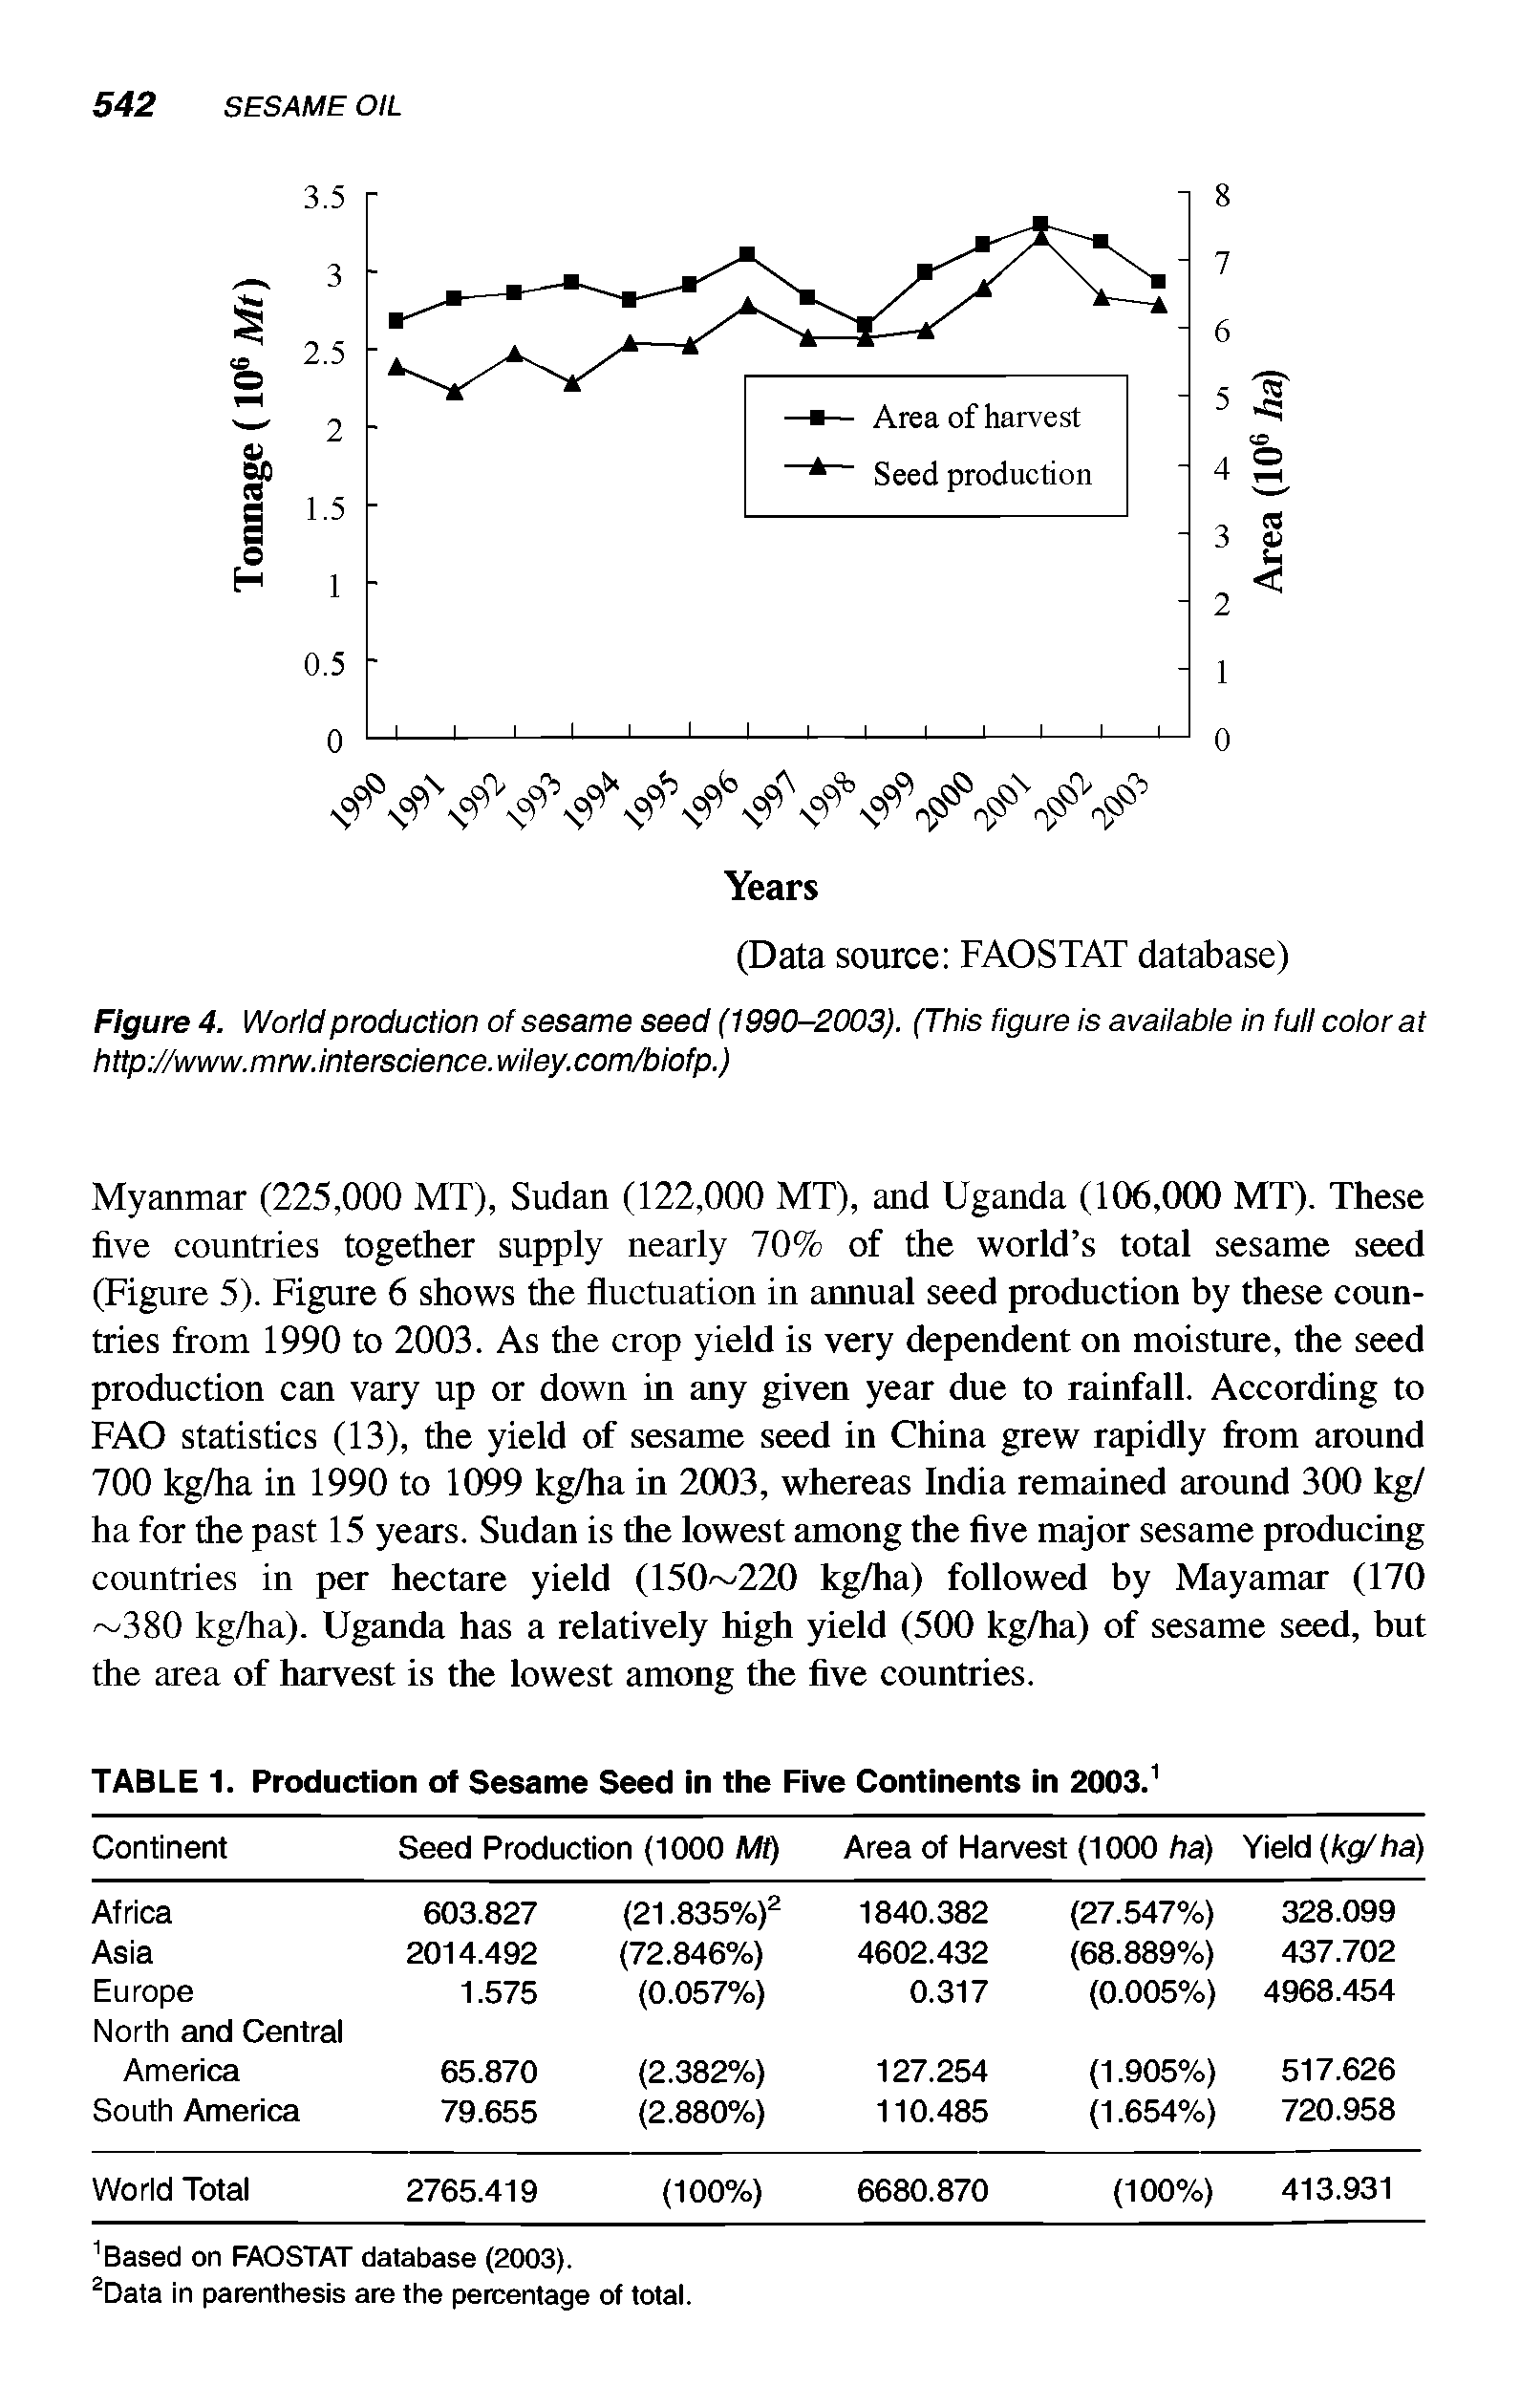 Figure 4. World production of sesame seed (1990-2003). (This figure is available in full color at http //www.mnv.interscience.wiley.com/biofp)...